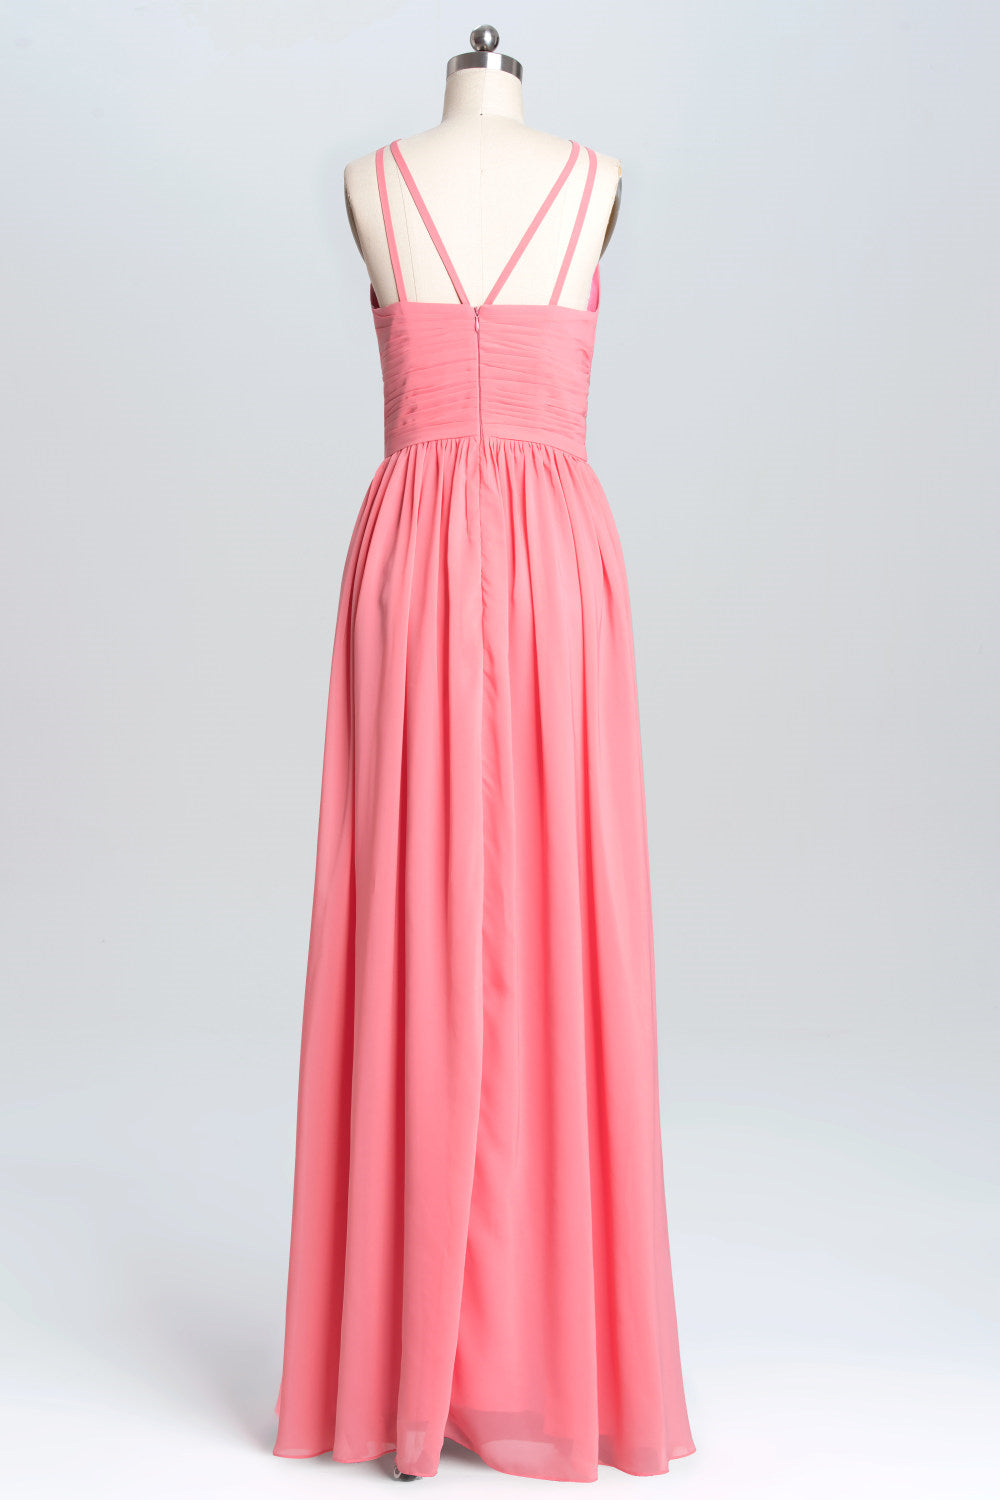 Homecoming Dressed Short, Coral Double Straps Pleated A-line Bridesmaid Dress